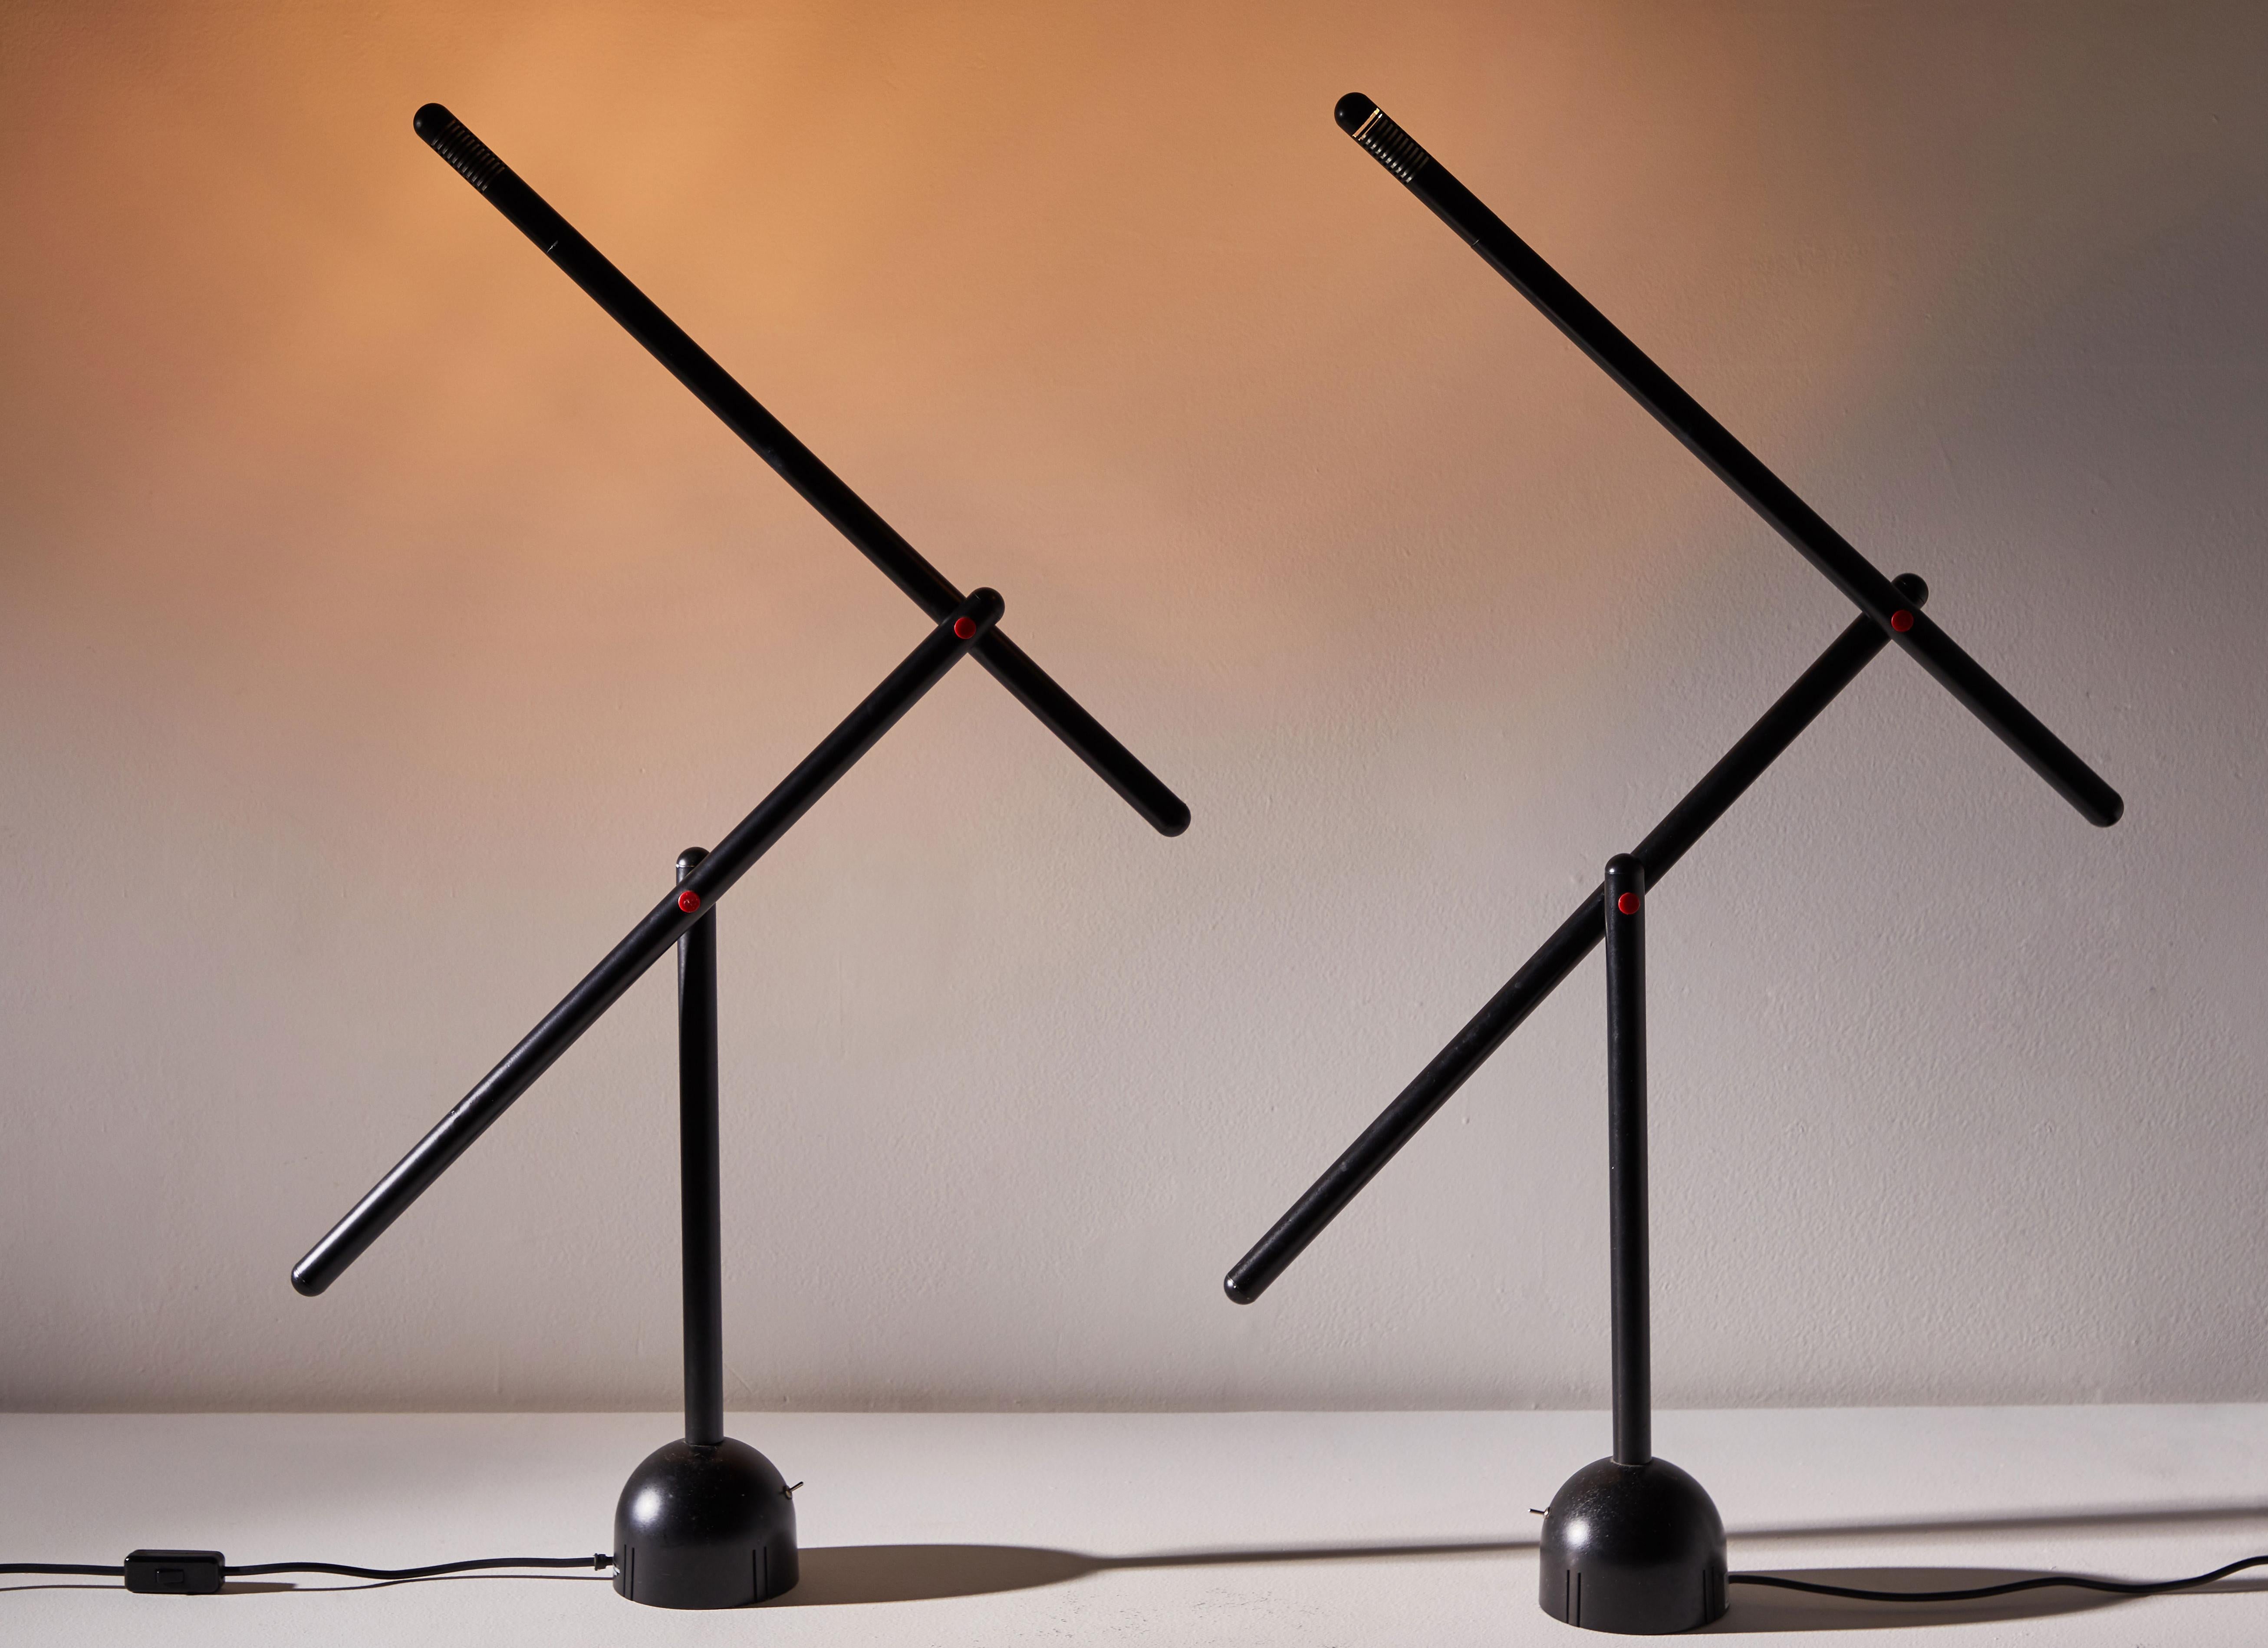 Two Mira table lamps by Mario Arnaboldi for Programmaluce, Italy, 1984. Enameled metal and aluminum construction with pivoting head. Original cord. Each light takes one G9 halogen bulb. This lamp was only produced for a year. Original manufacturers